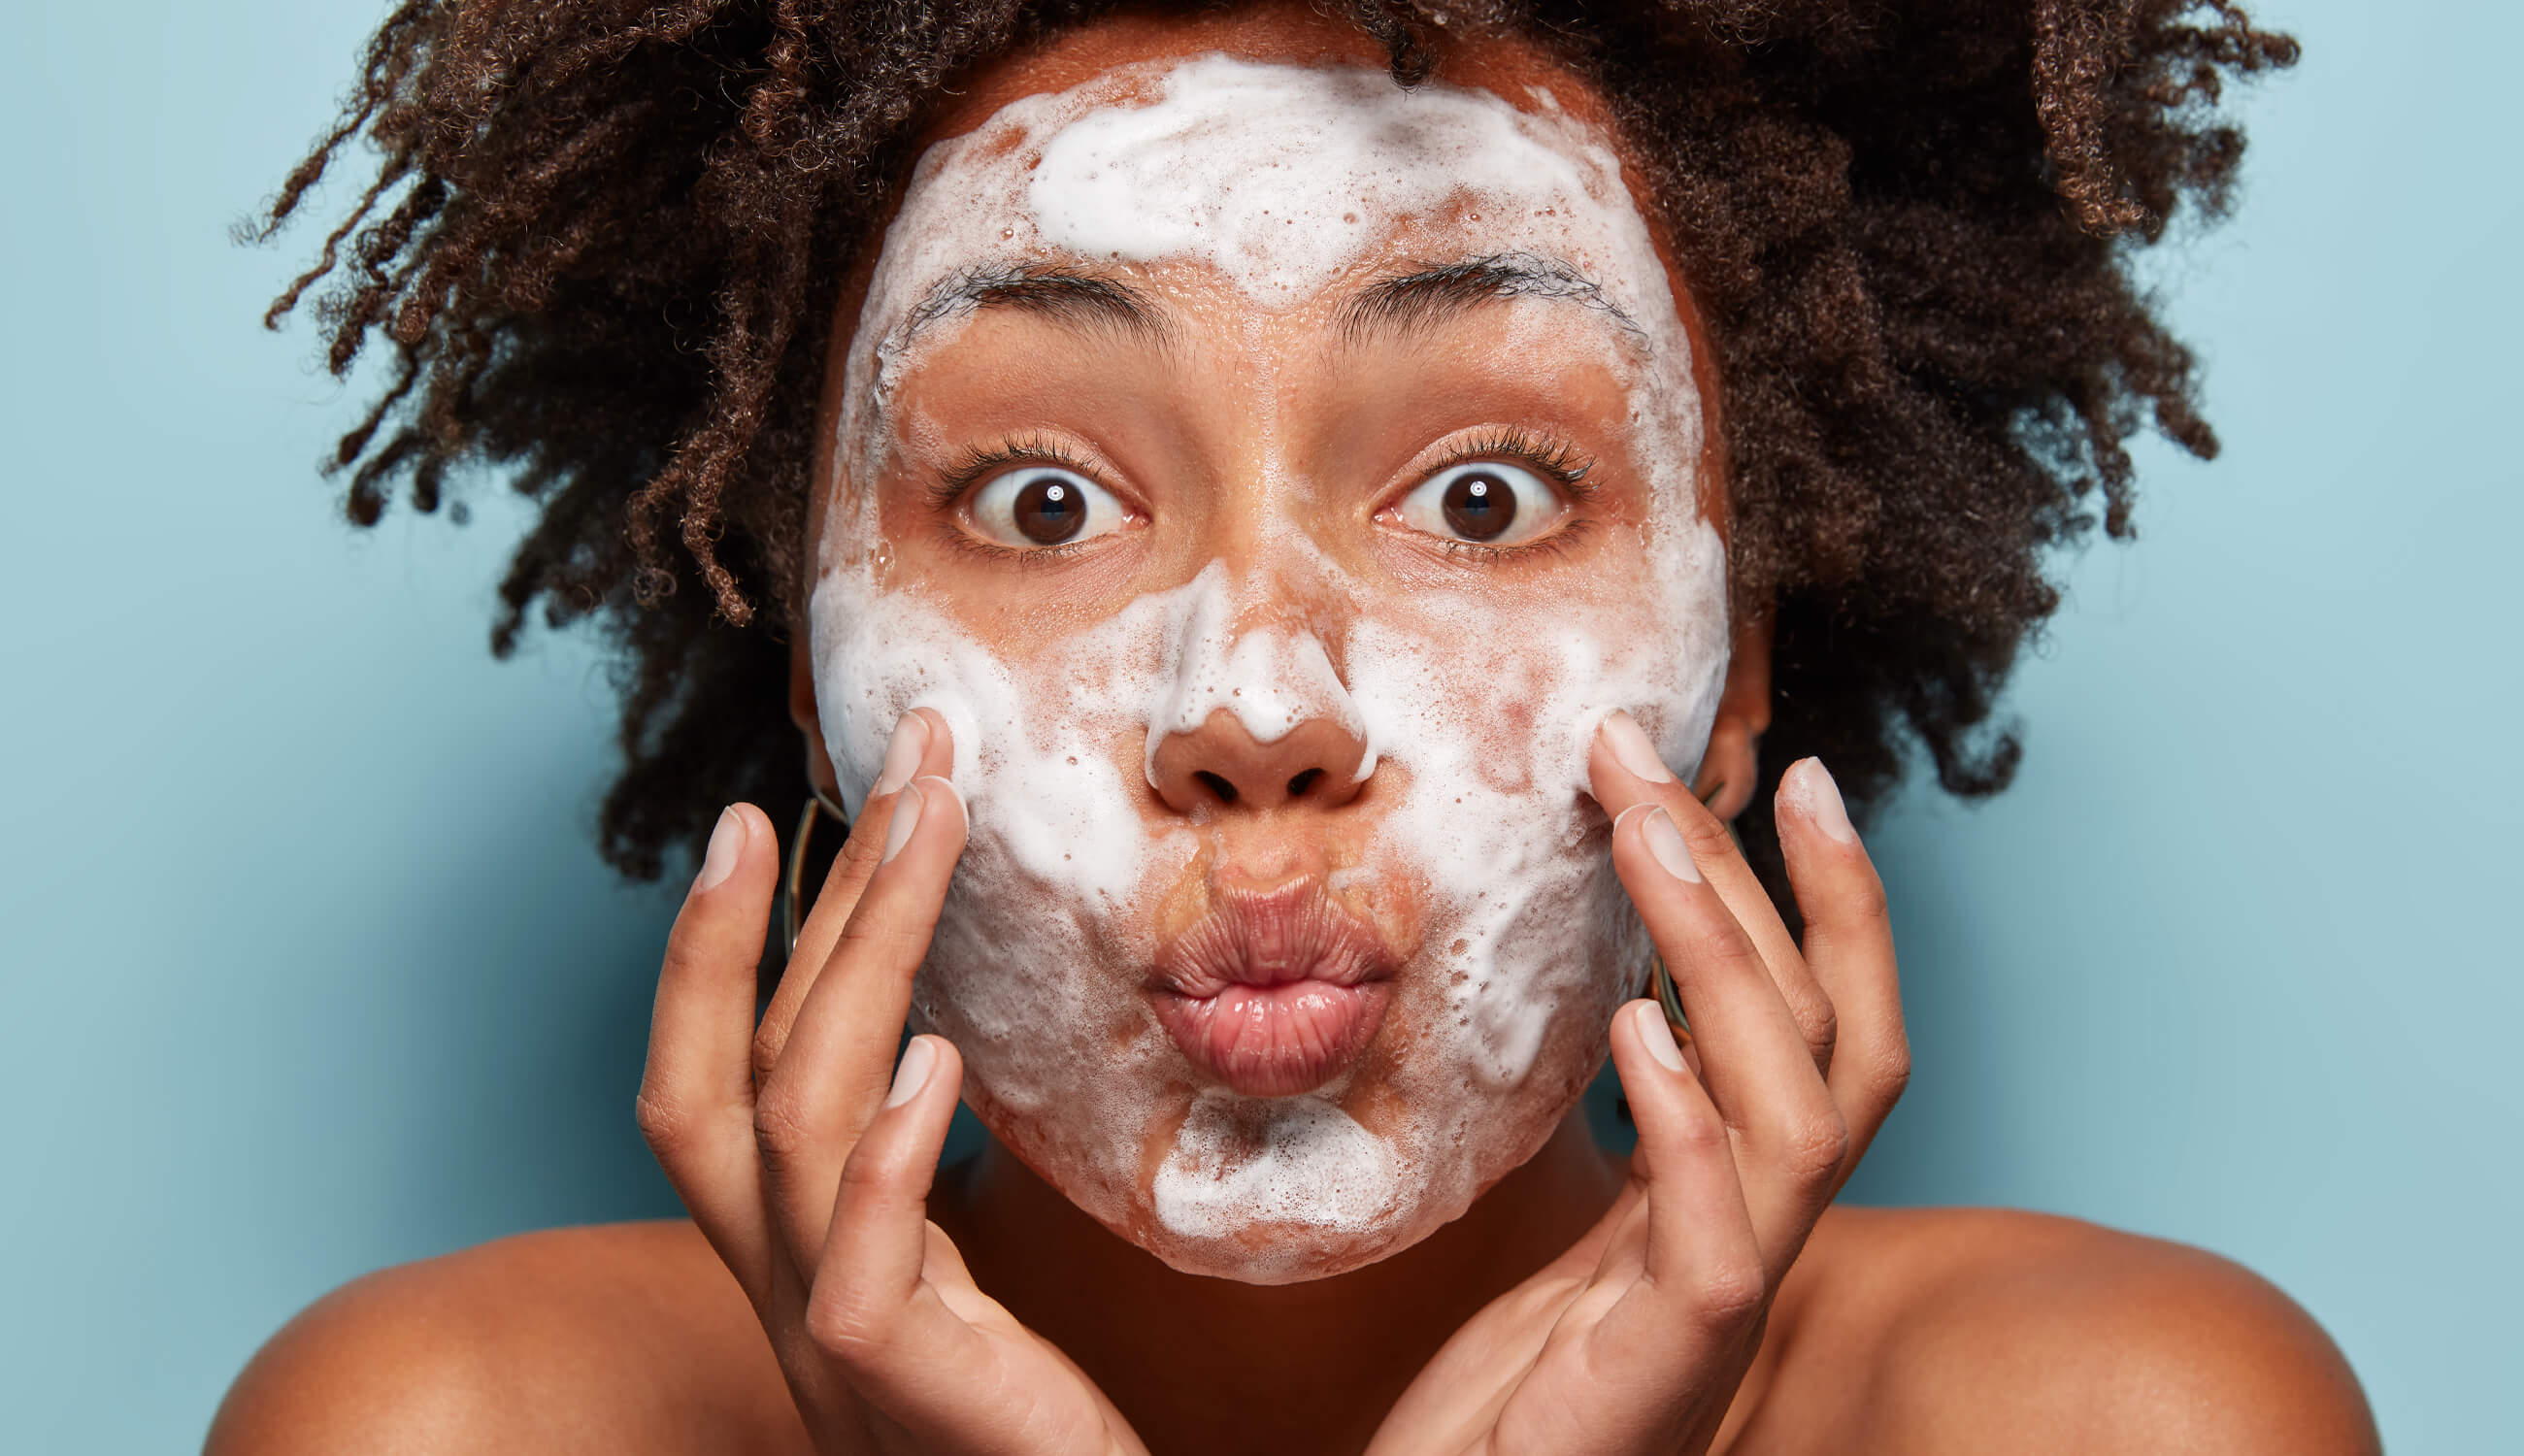 Cleanser vs. Face Wash: Which One Should You Use